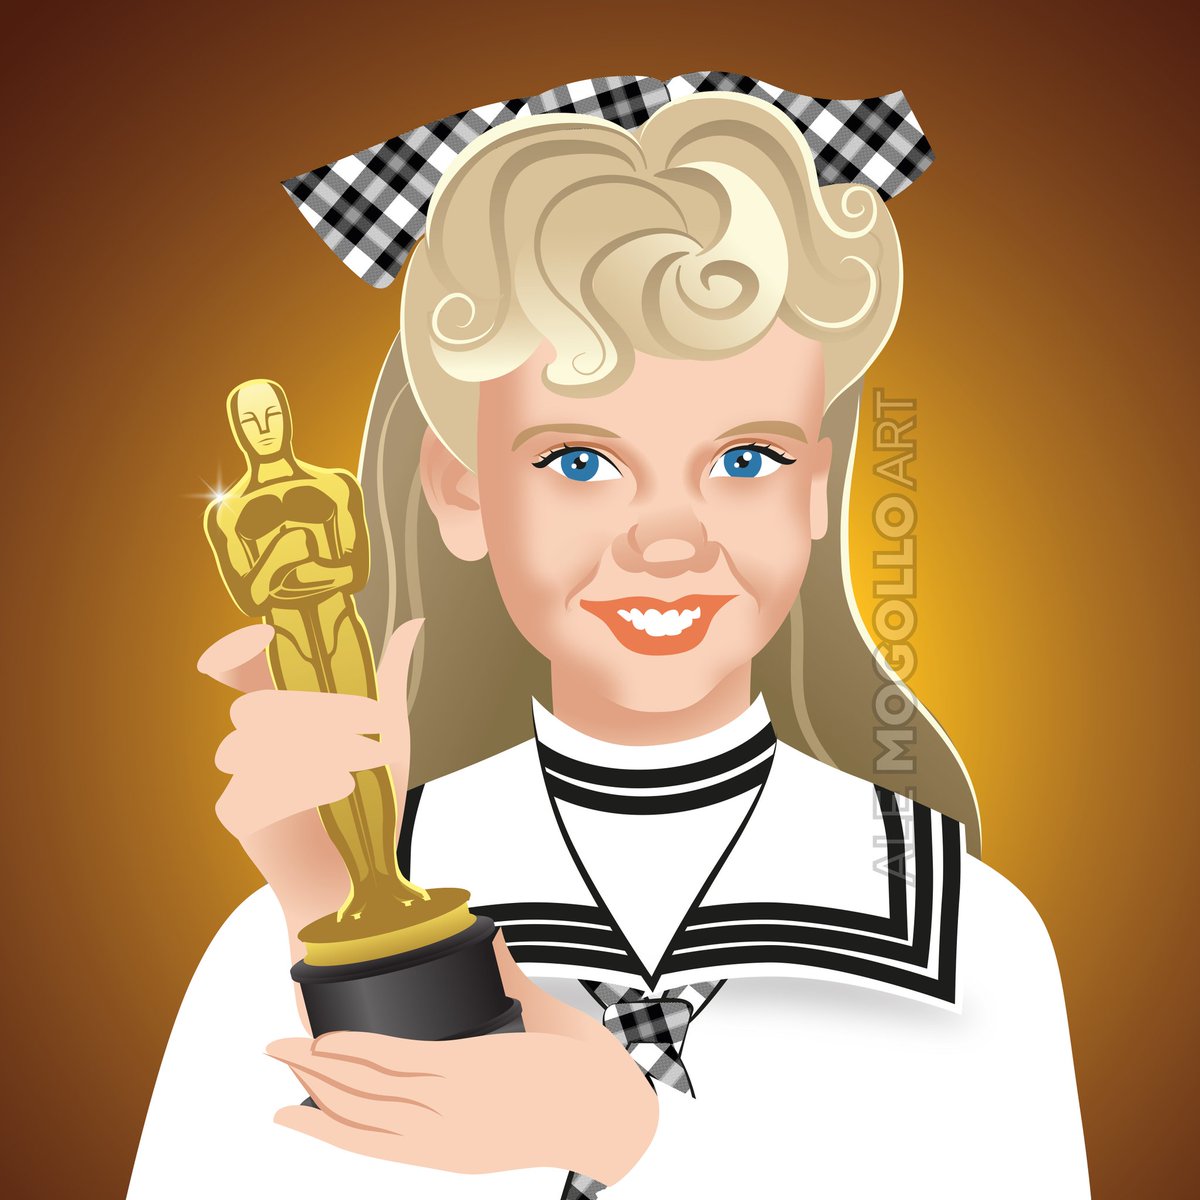 Happy birthday to the wonderful Hayley Mills who is 77 years young today ❤️ Here with her miniature Oscar she won for Pollyanna. The original was stolen in the 80s and the Academy has gifted her recently a new one as replacement.
#hayleymills #pollyanna #theparenttrap #Oscar